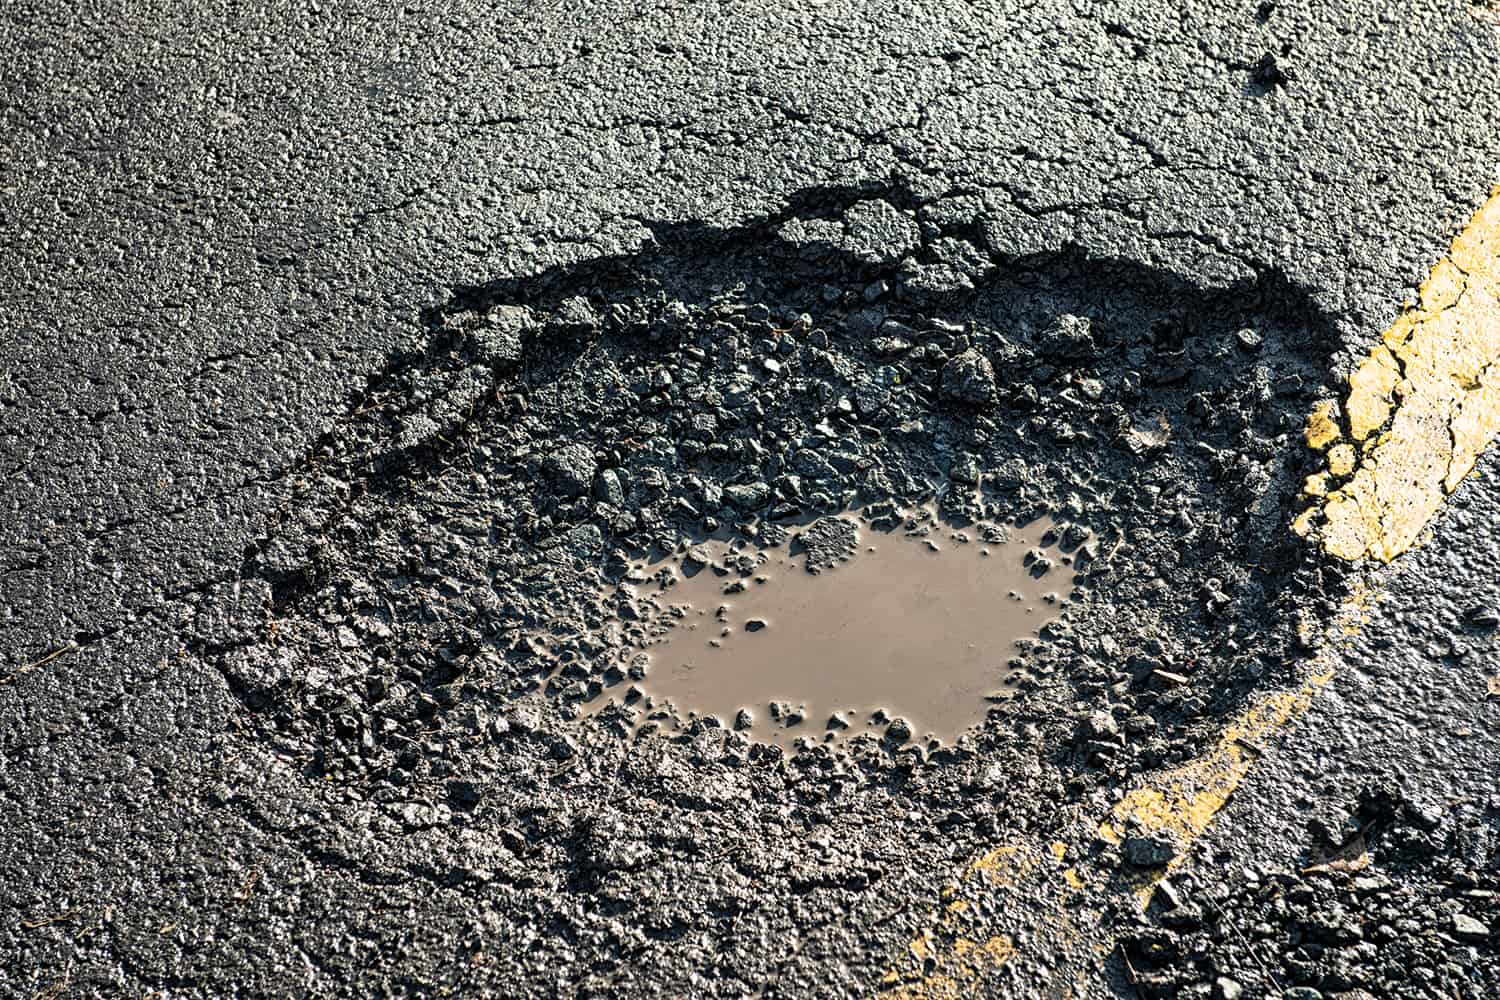 A large pothole in the road.